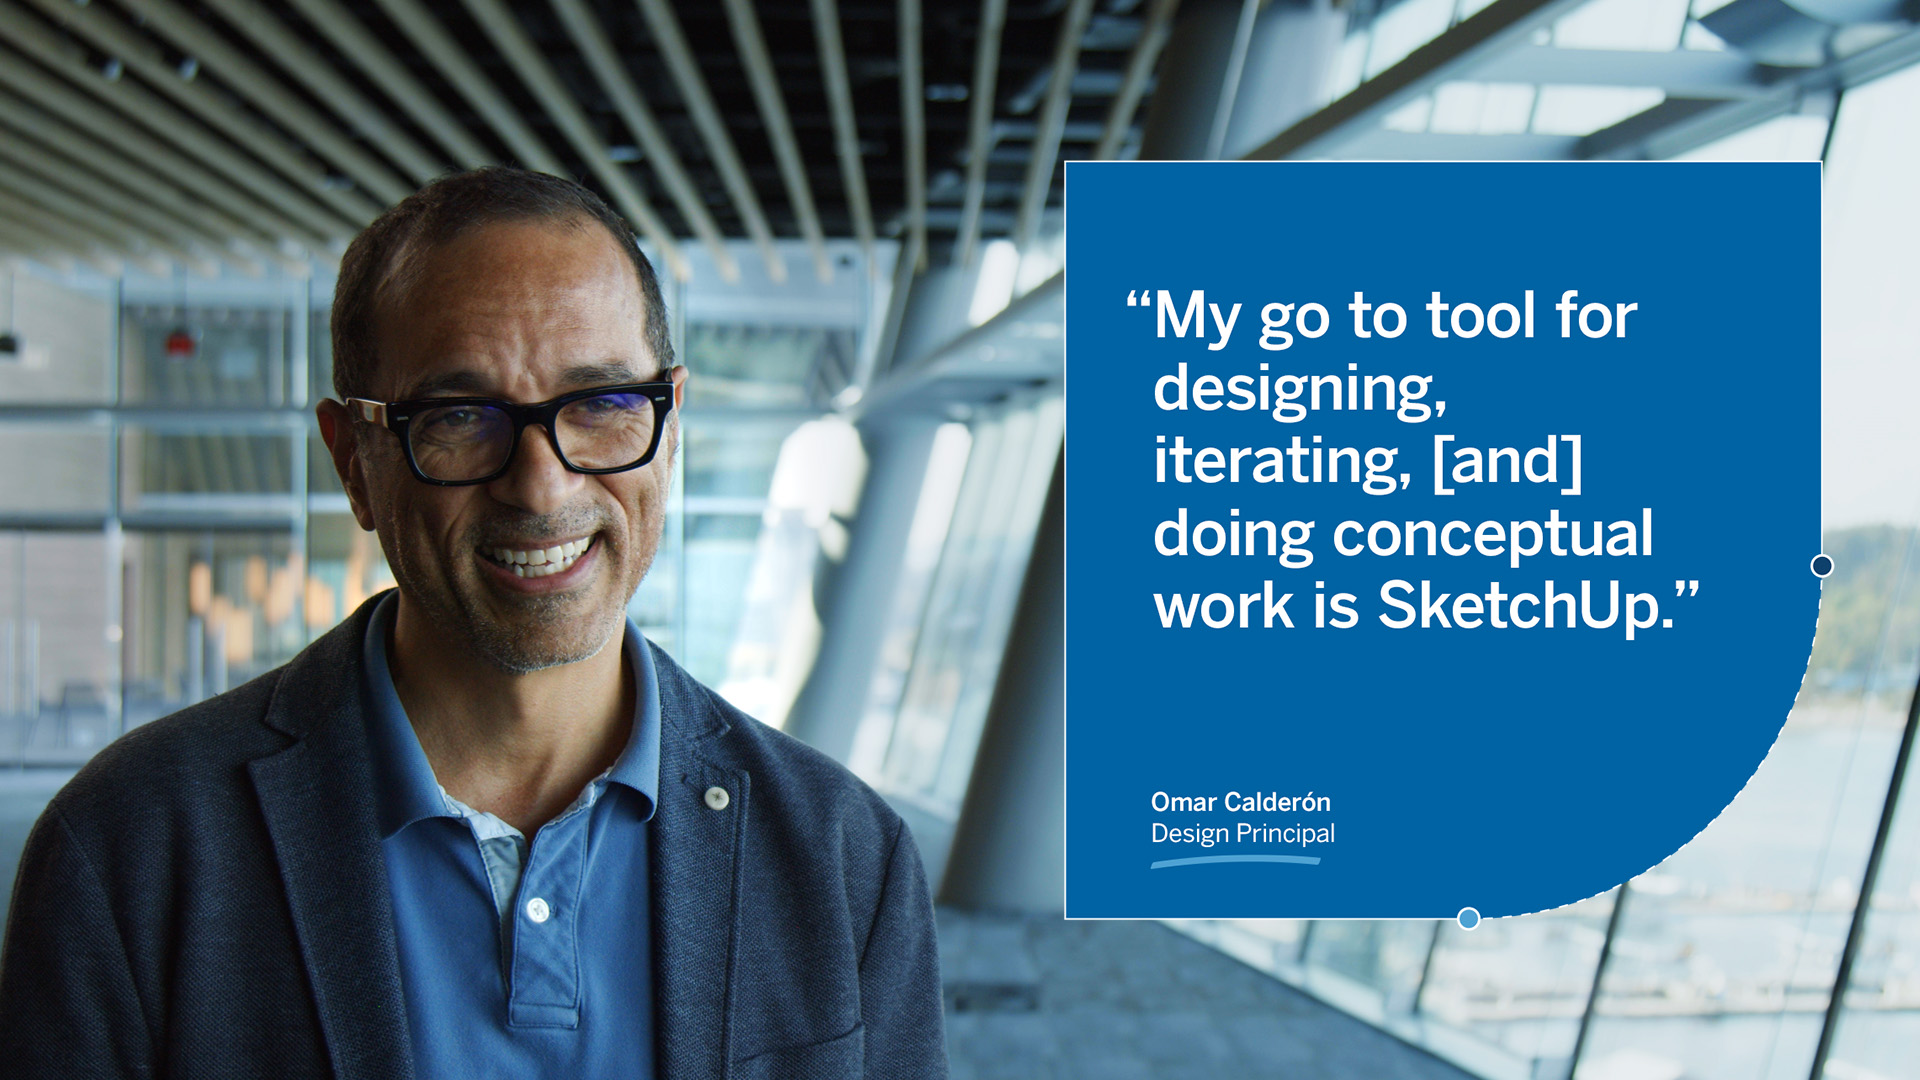 Watch an interview with Design Principal Omar Calderon, who uses SketchUp as his go-to tool for creating concepts. 